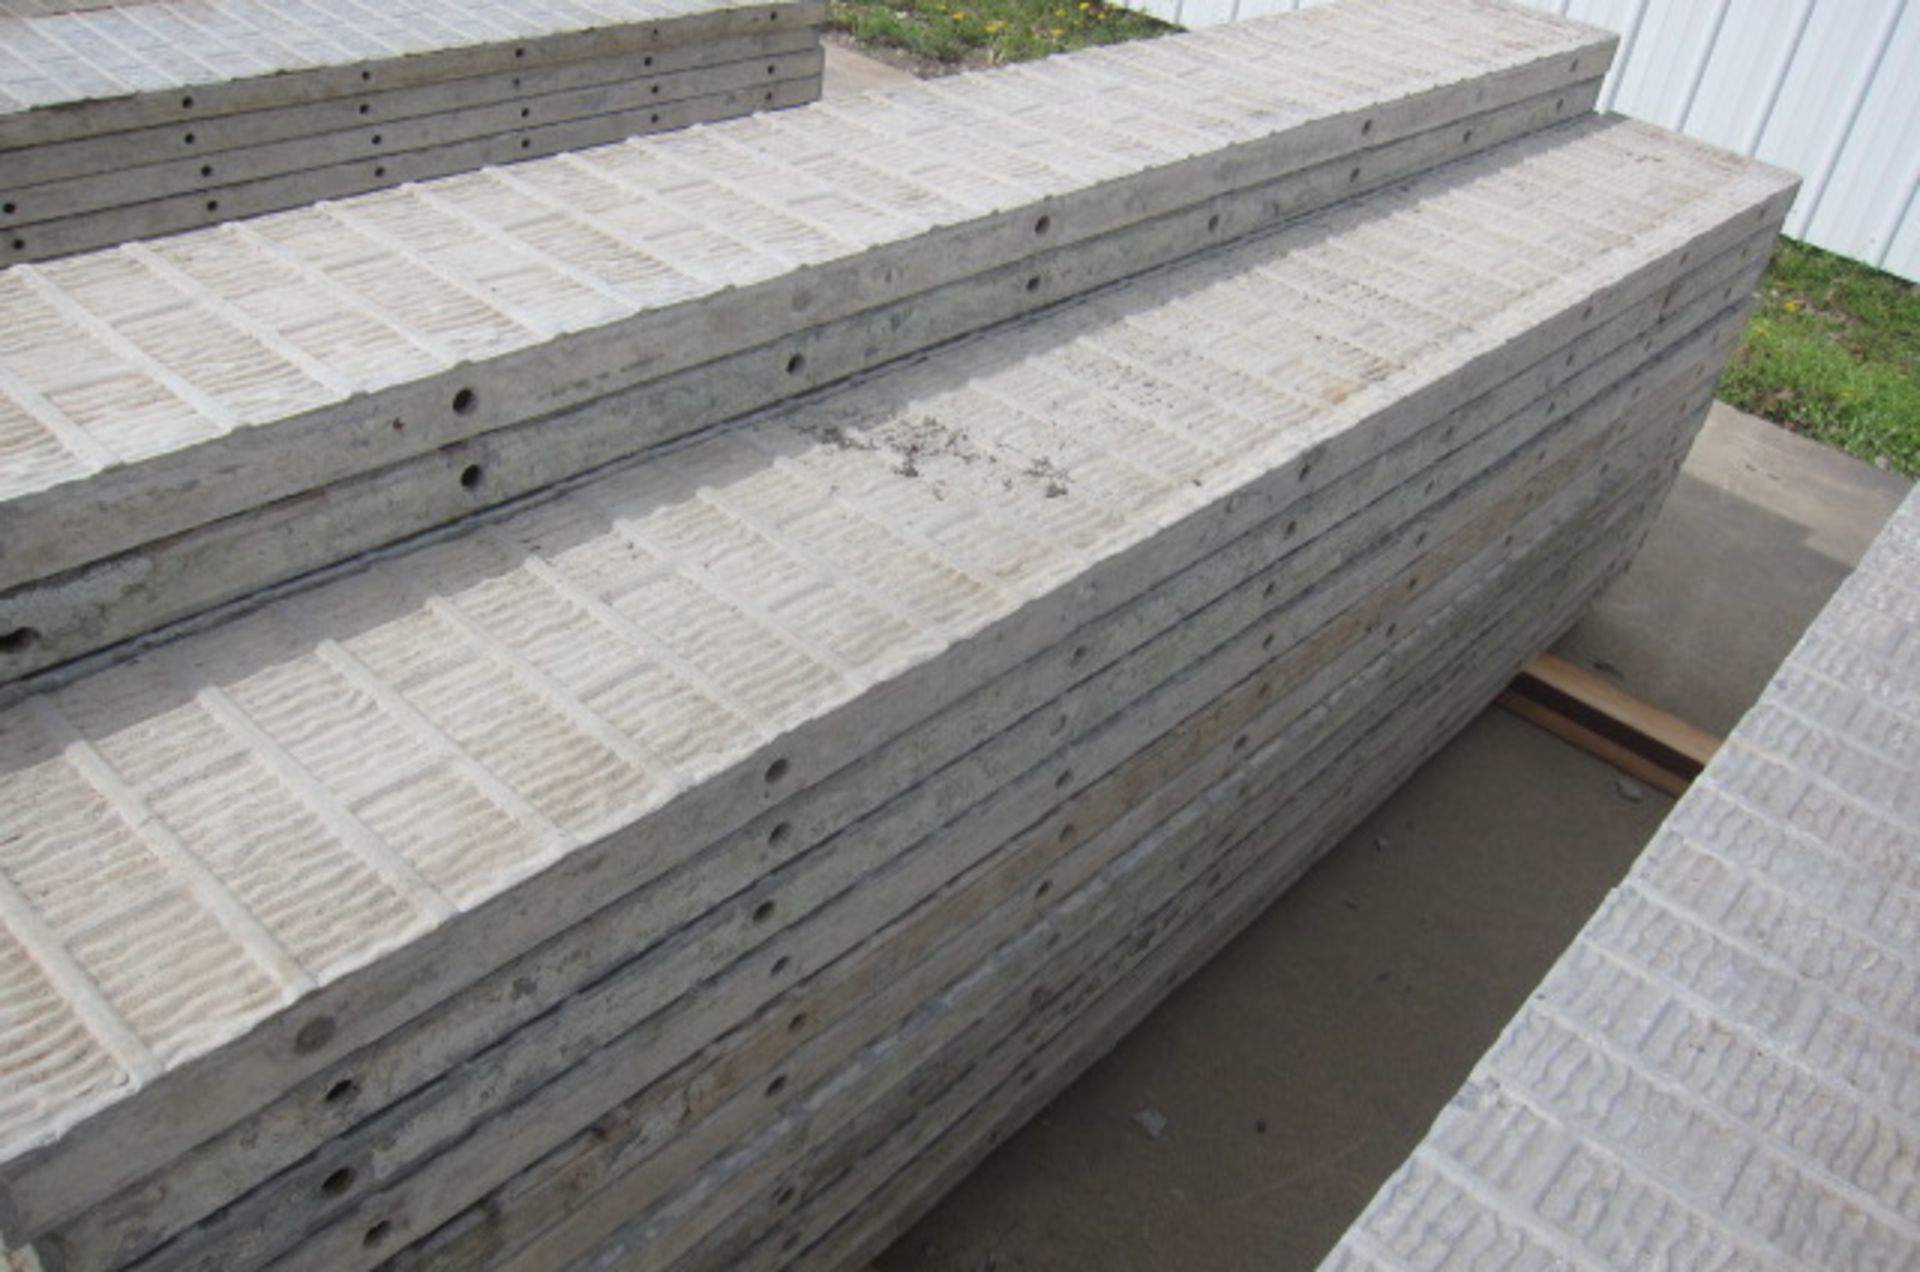 (12) 12" X 8' Wall-ties Aluminum Concrete Forms, VertiBrick, 6-12 Hole Pattern, Nice Clean Set - Image 3 of 3